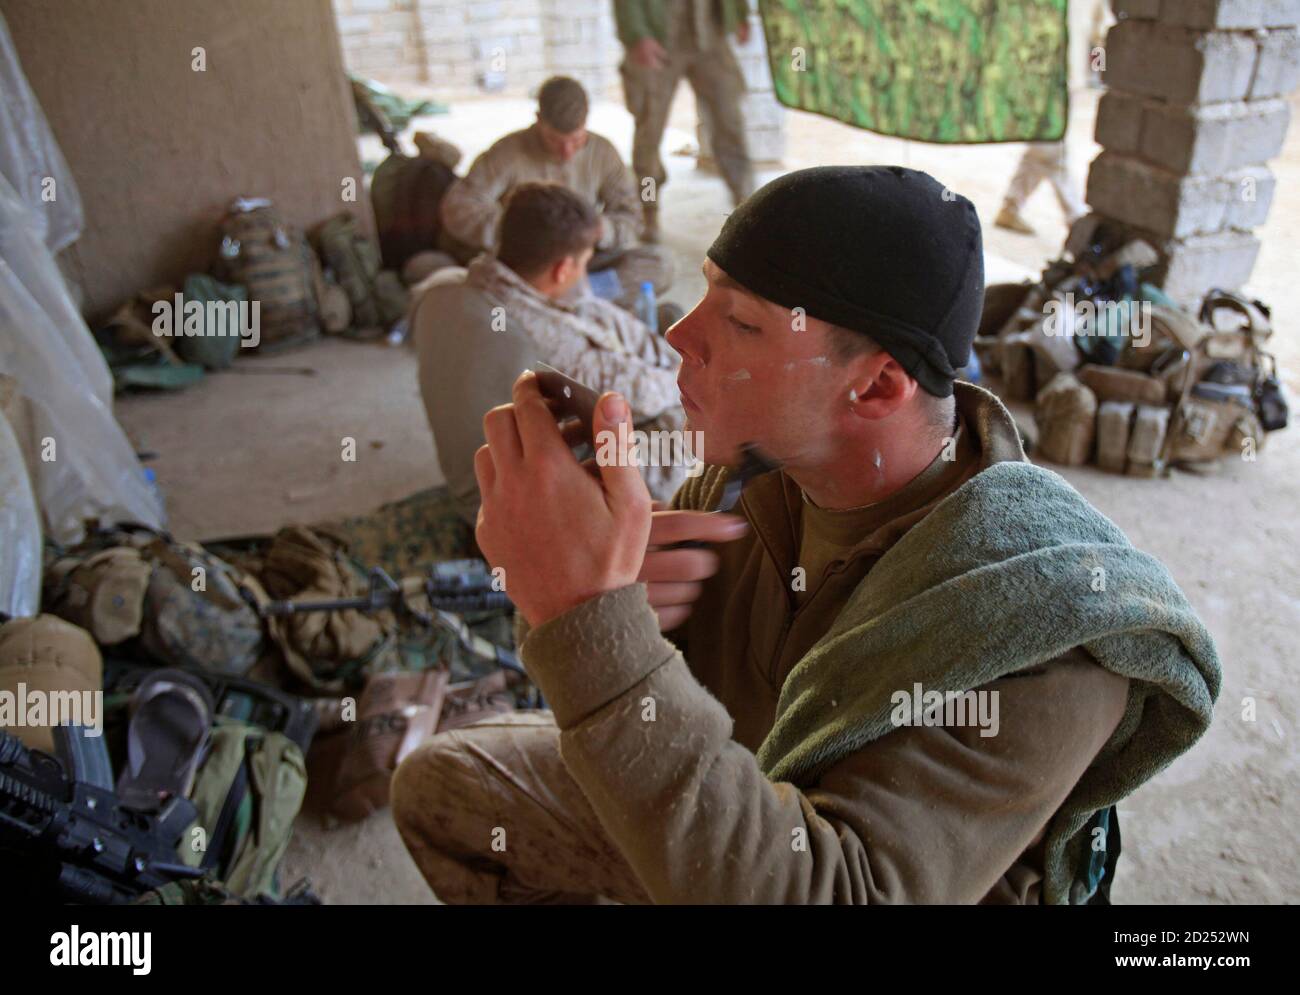 A U.S. Marine from Bravo Company of the 1st Battalion, 6th Marines shaves at early morning in Marjah, Helmand province, southern Afghanistan February 25, 2010.   REUTERS/Goran Tomasevic  (AFGHANISTAN - Tags: MILITARY POLITICS) Stock Photo